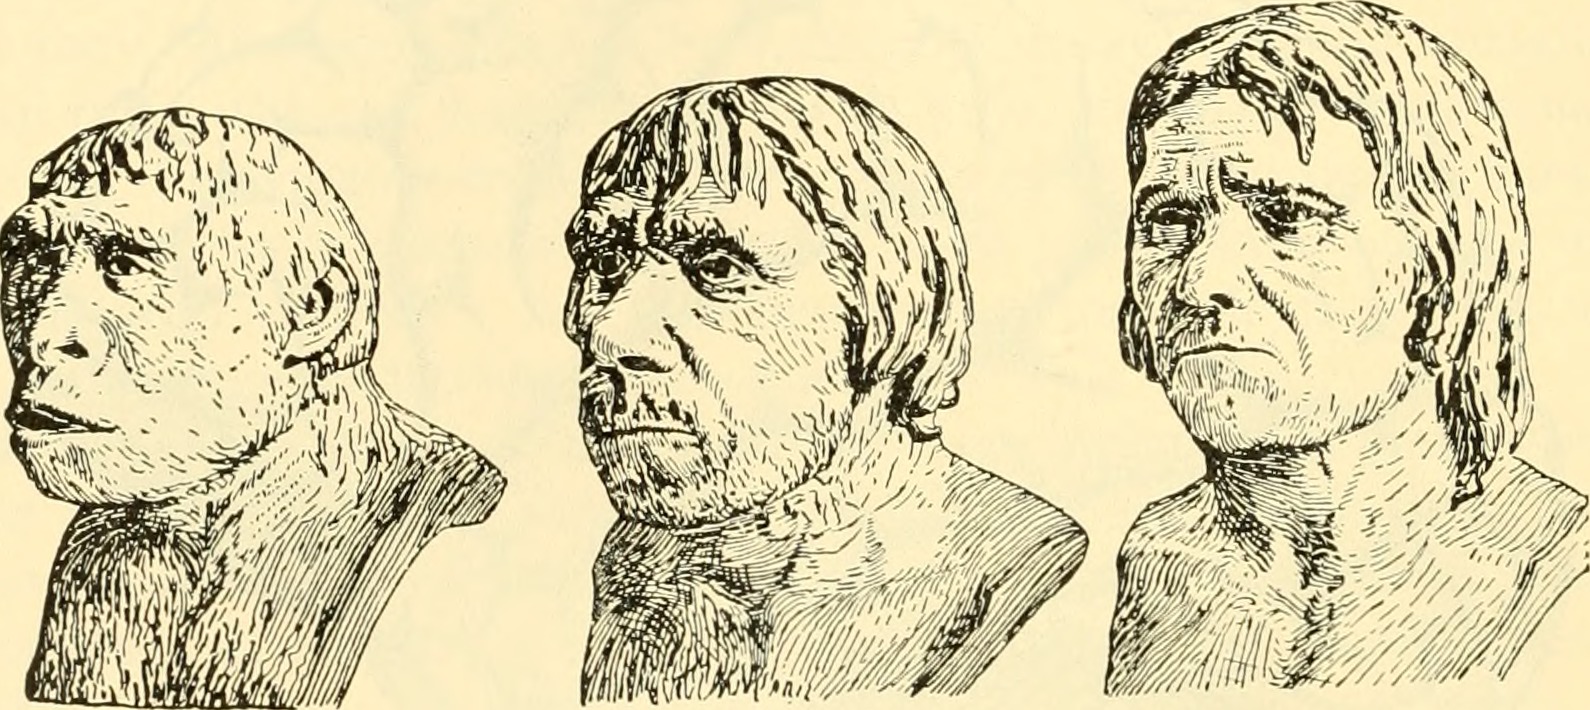 Three stages of human evolution, looking more like a modern man from left to right. Pencil drawings on a tan background